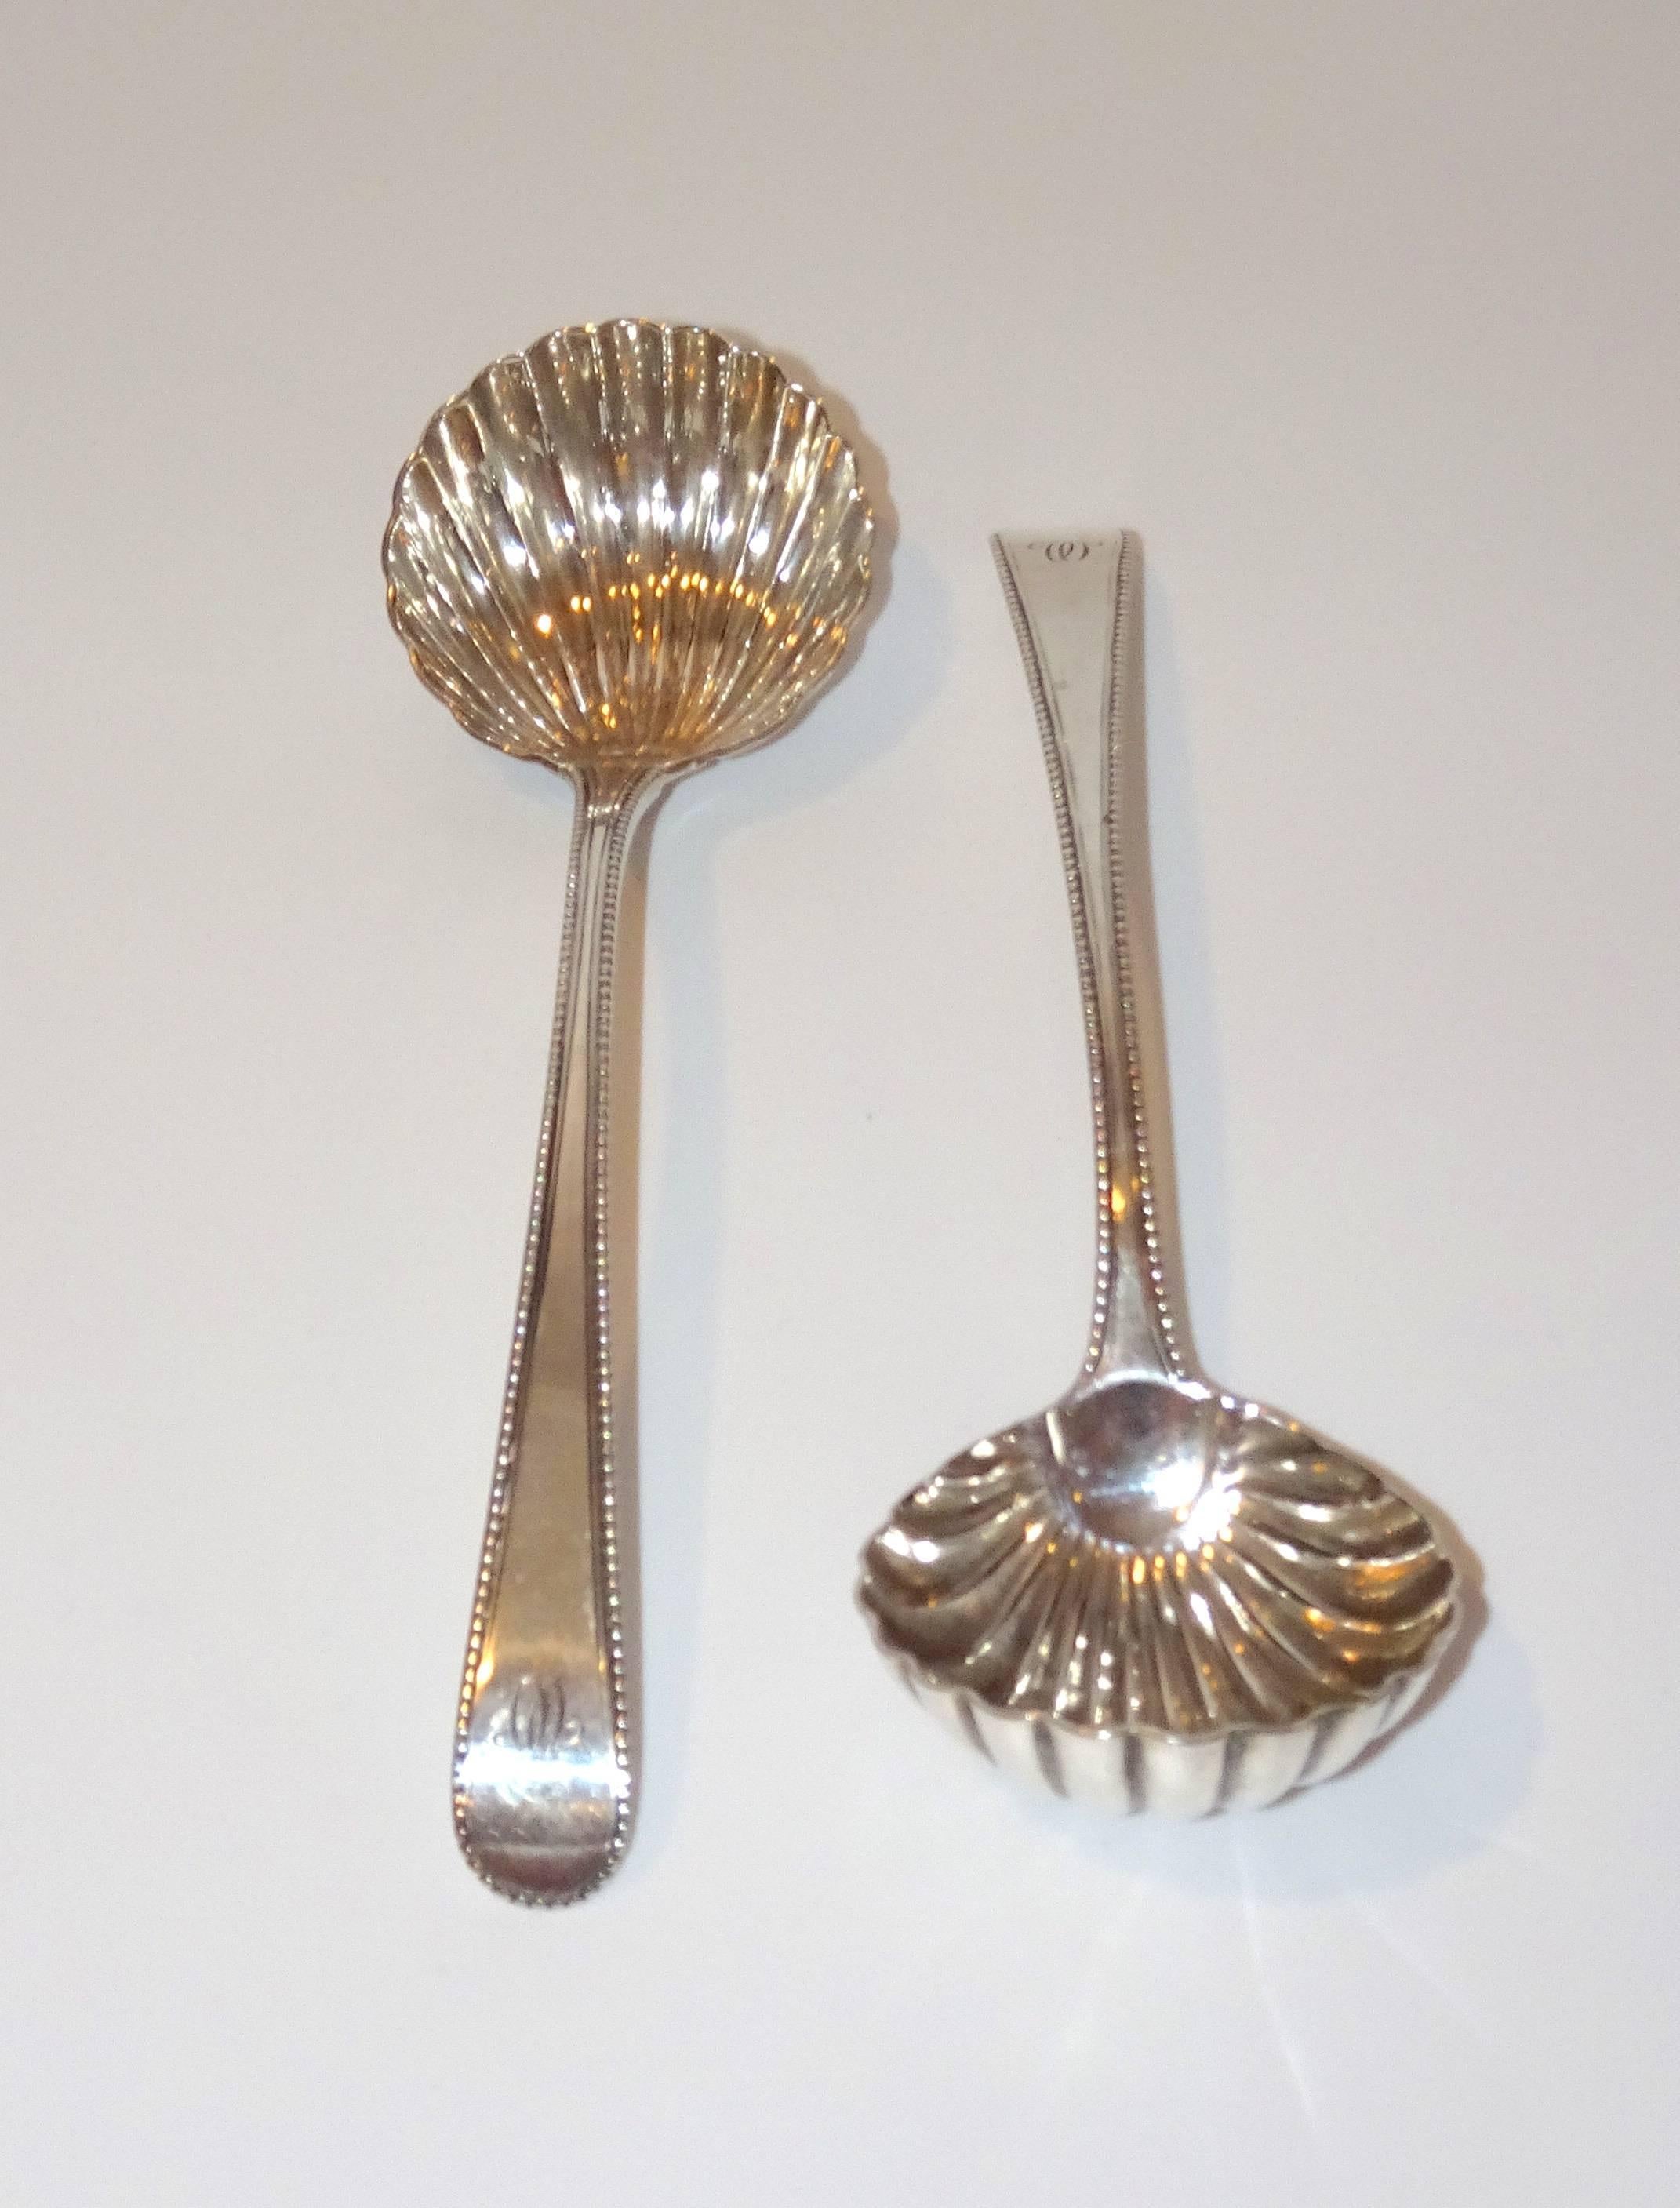 Pair of 18th century George Smith III sterling silver shell ladles. Beautiful detail in the ladles